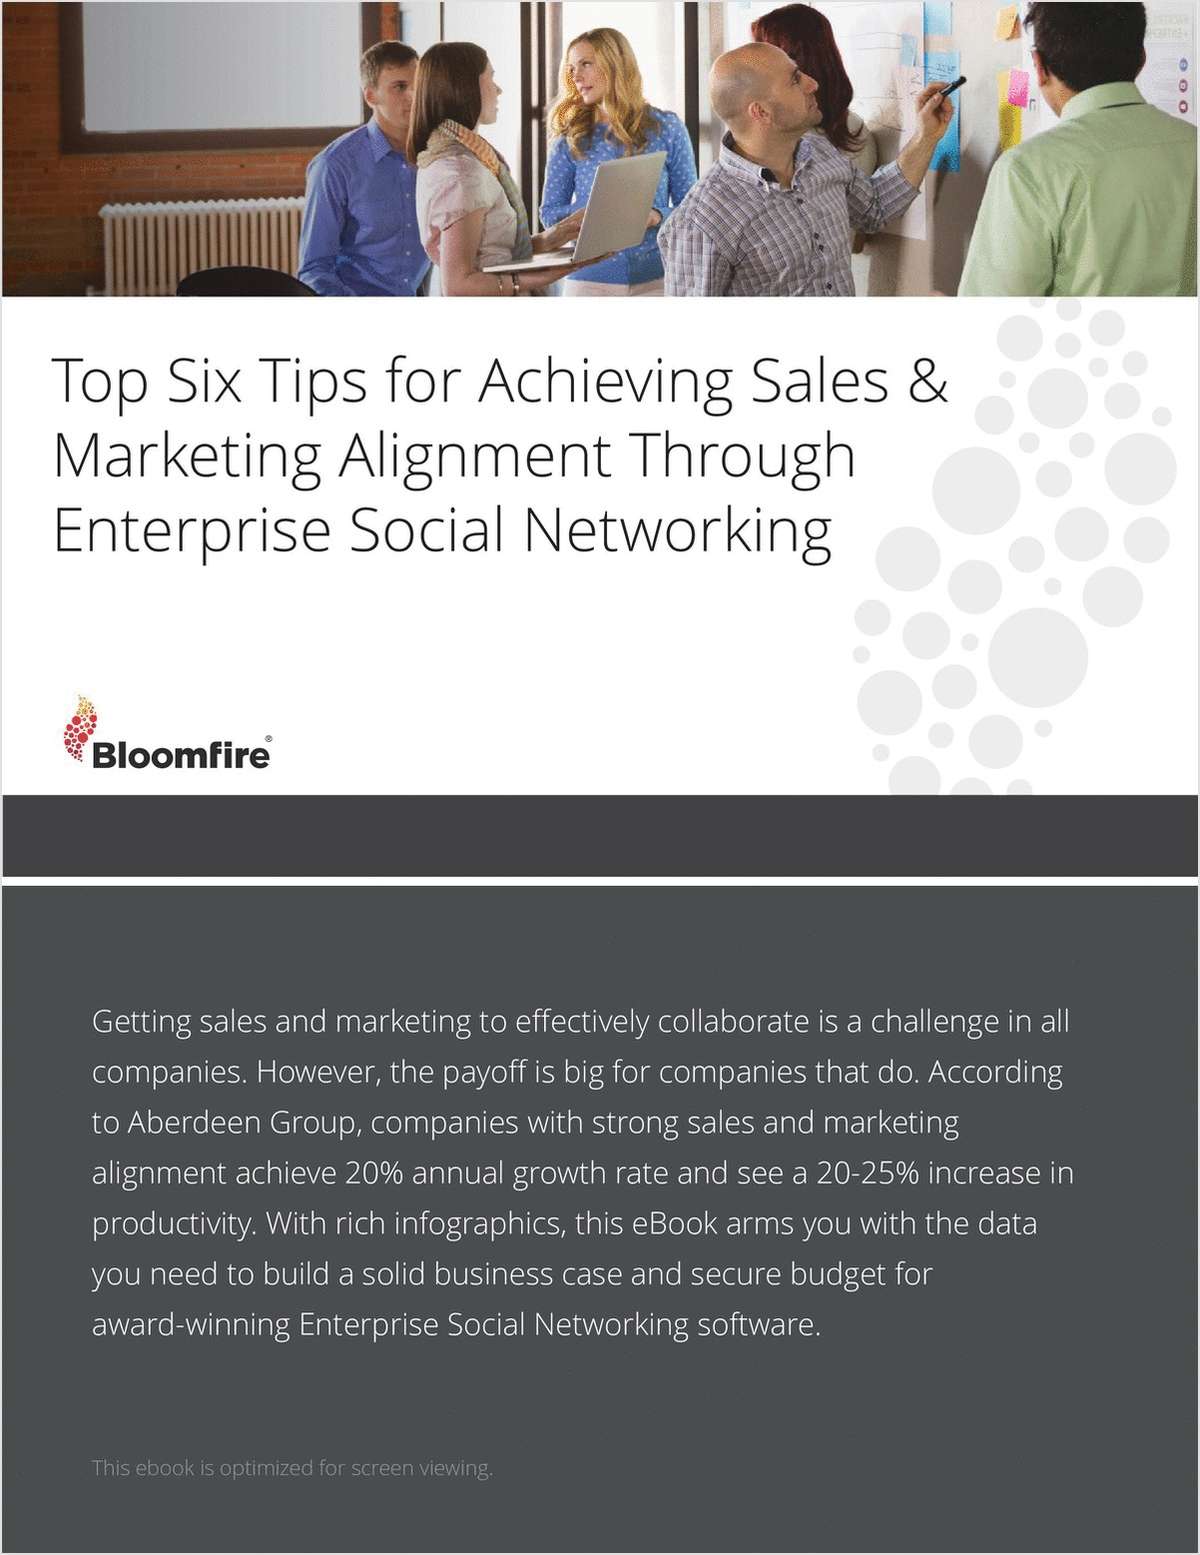 Top Six Tips for Achieving Sales & Marketing Alignment through Enterprise Social Networking